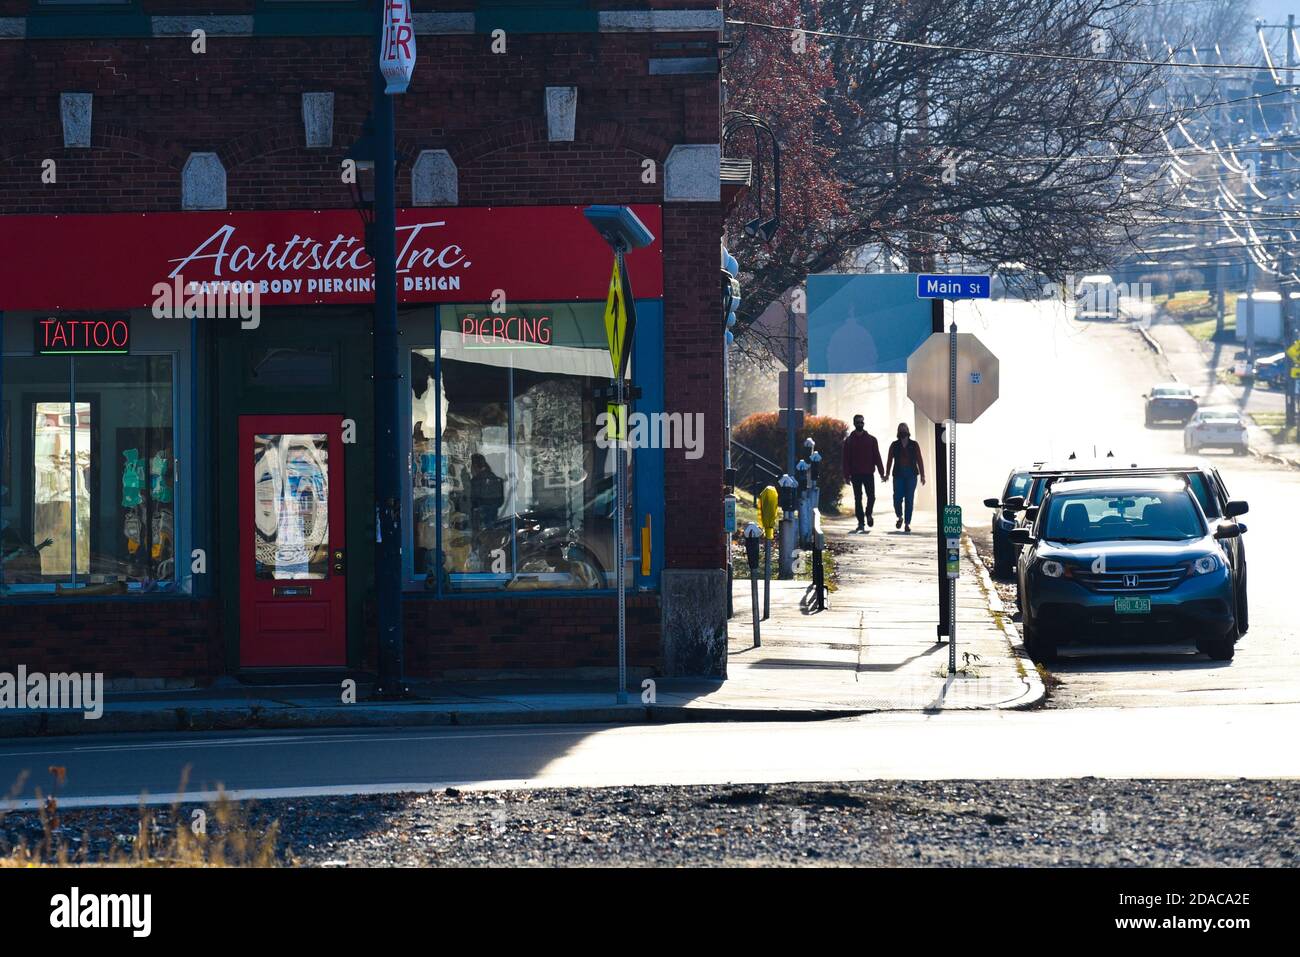 Couple strolling hand in hand near tattoo parlor Montpelier, capital of Vermont, USA. Stock Photo